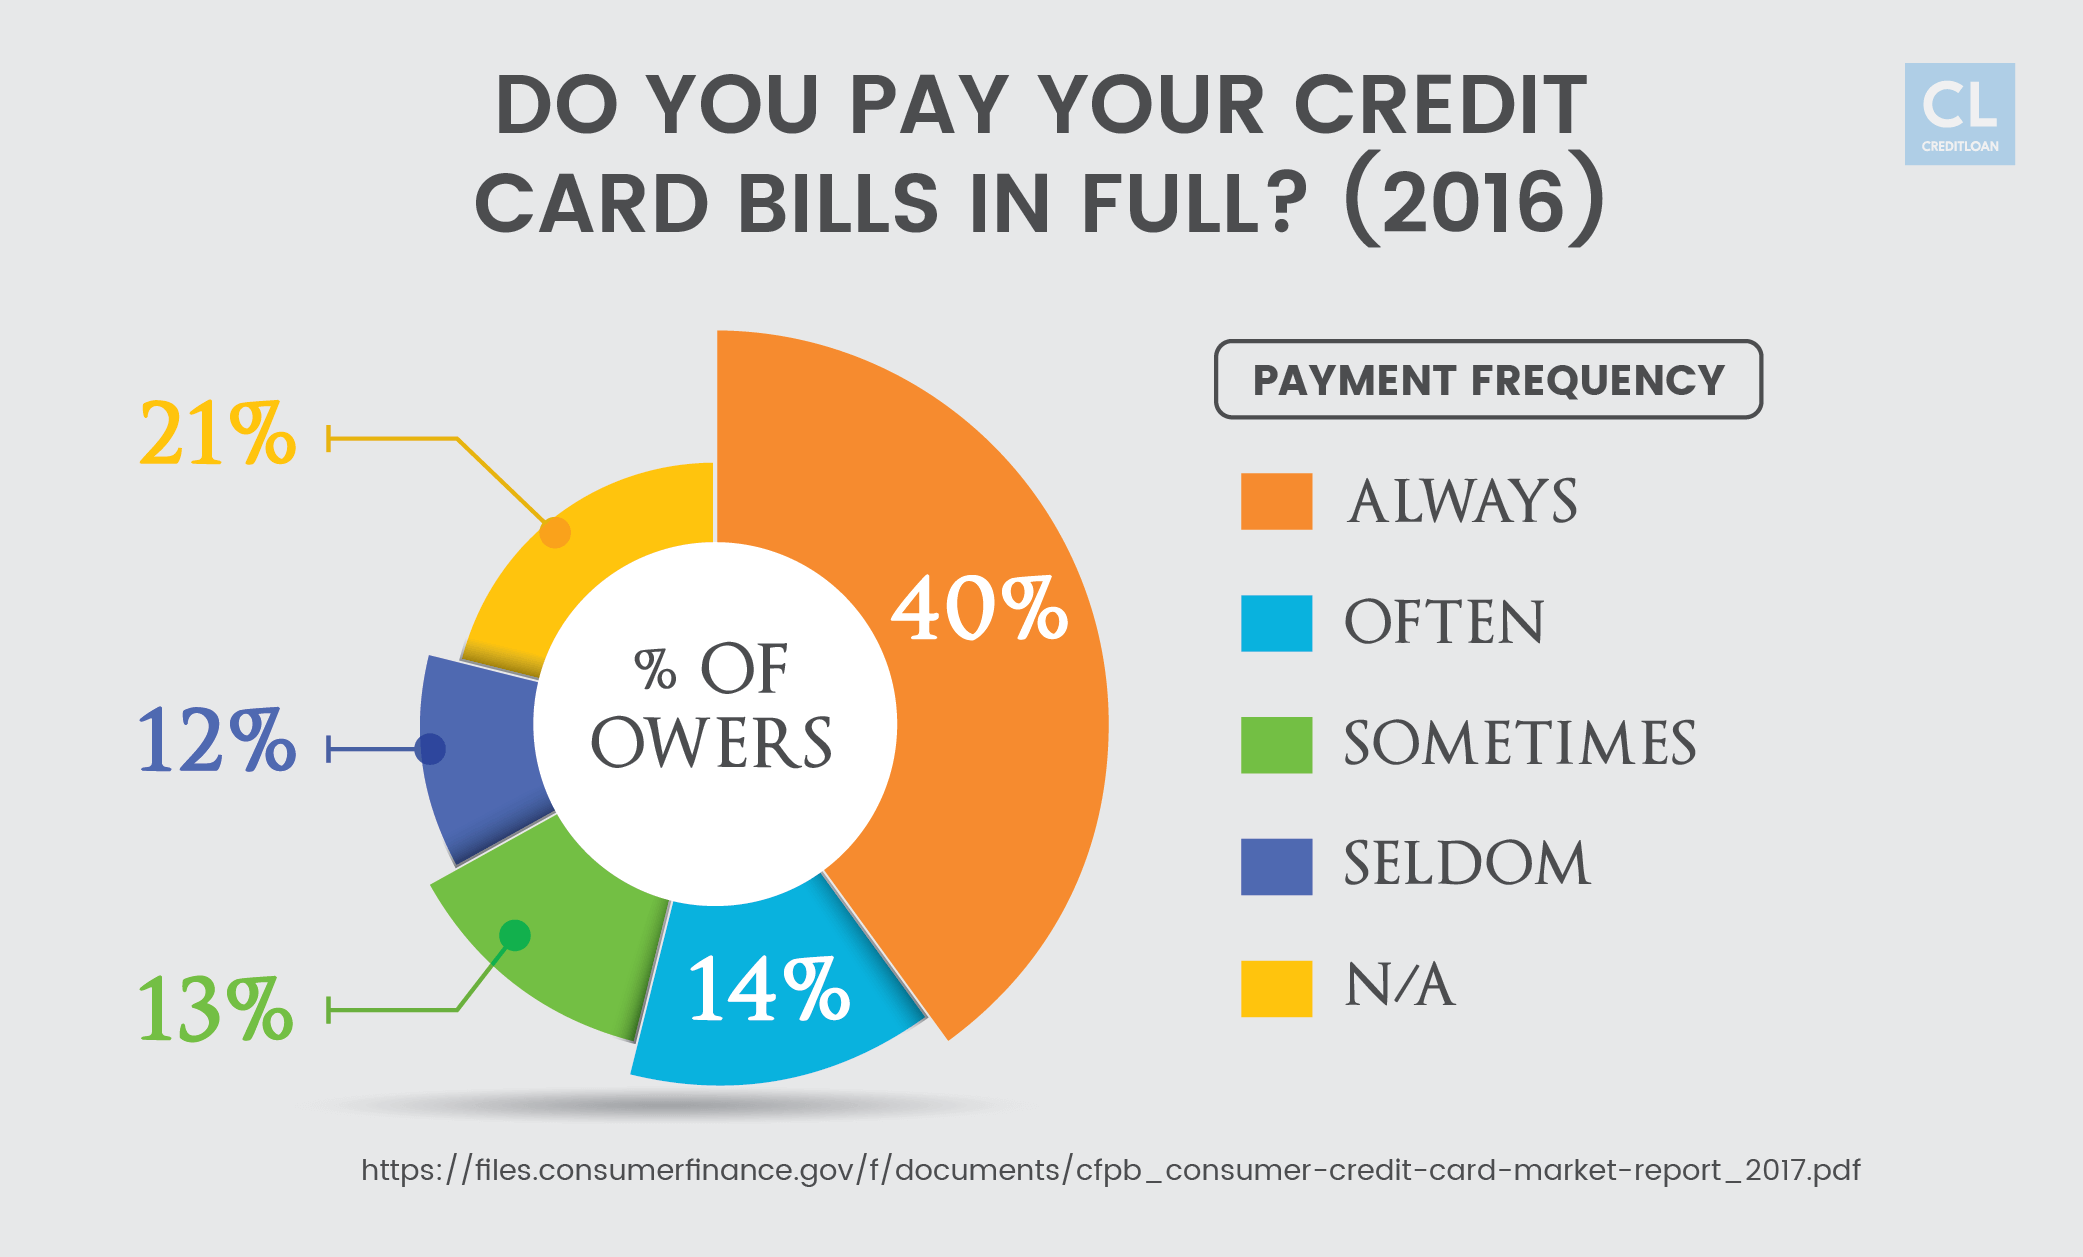 Frequency of Paying Credit Card Bills in Full